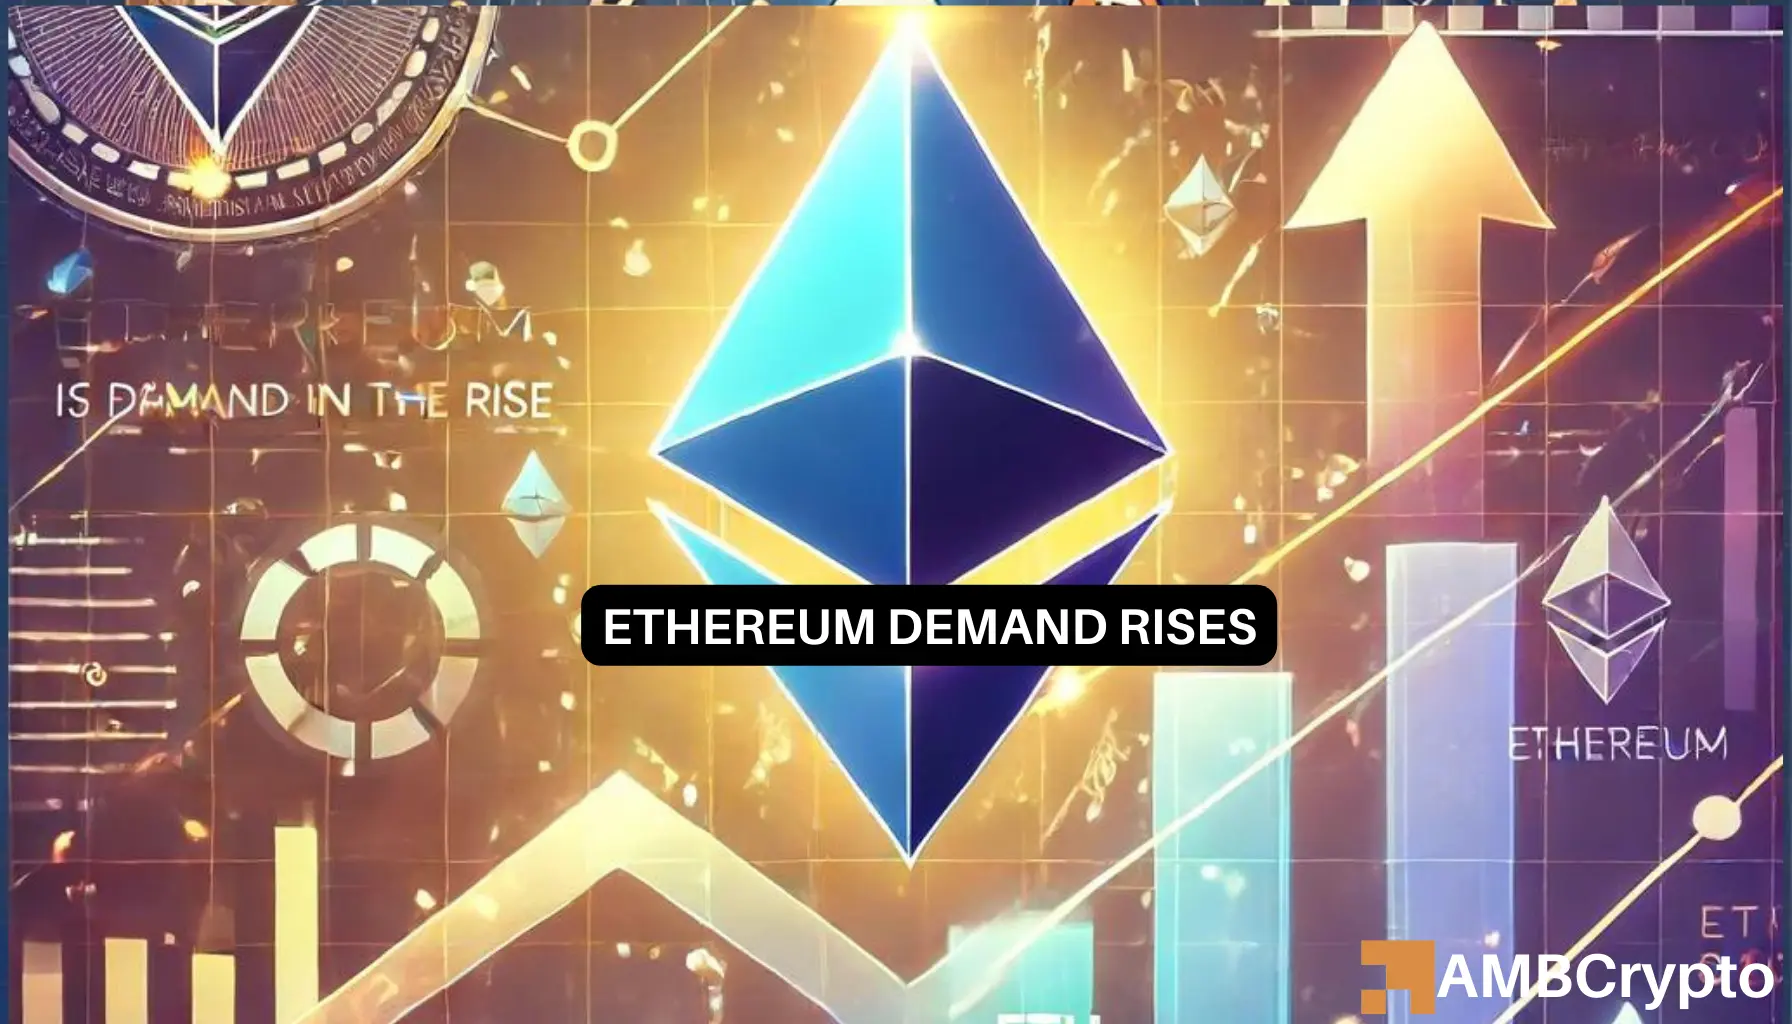 What Ethereum’s rising demand says about ETH’s price action